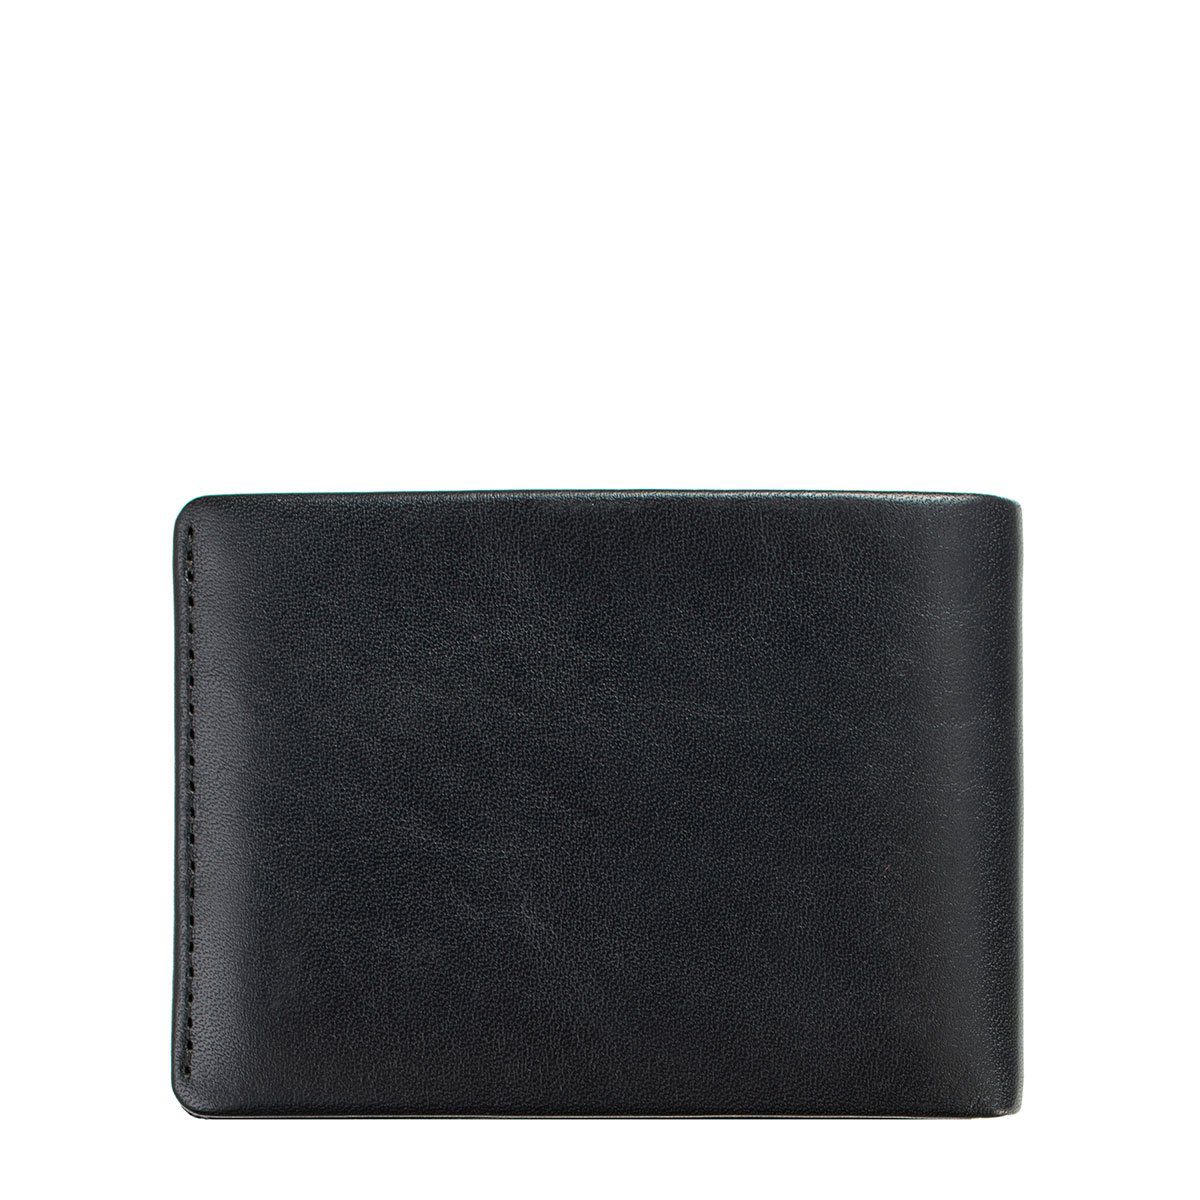 Status Anxiety Black Jonah Wallet - LUXAH Gifts and Homewares